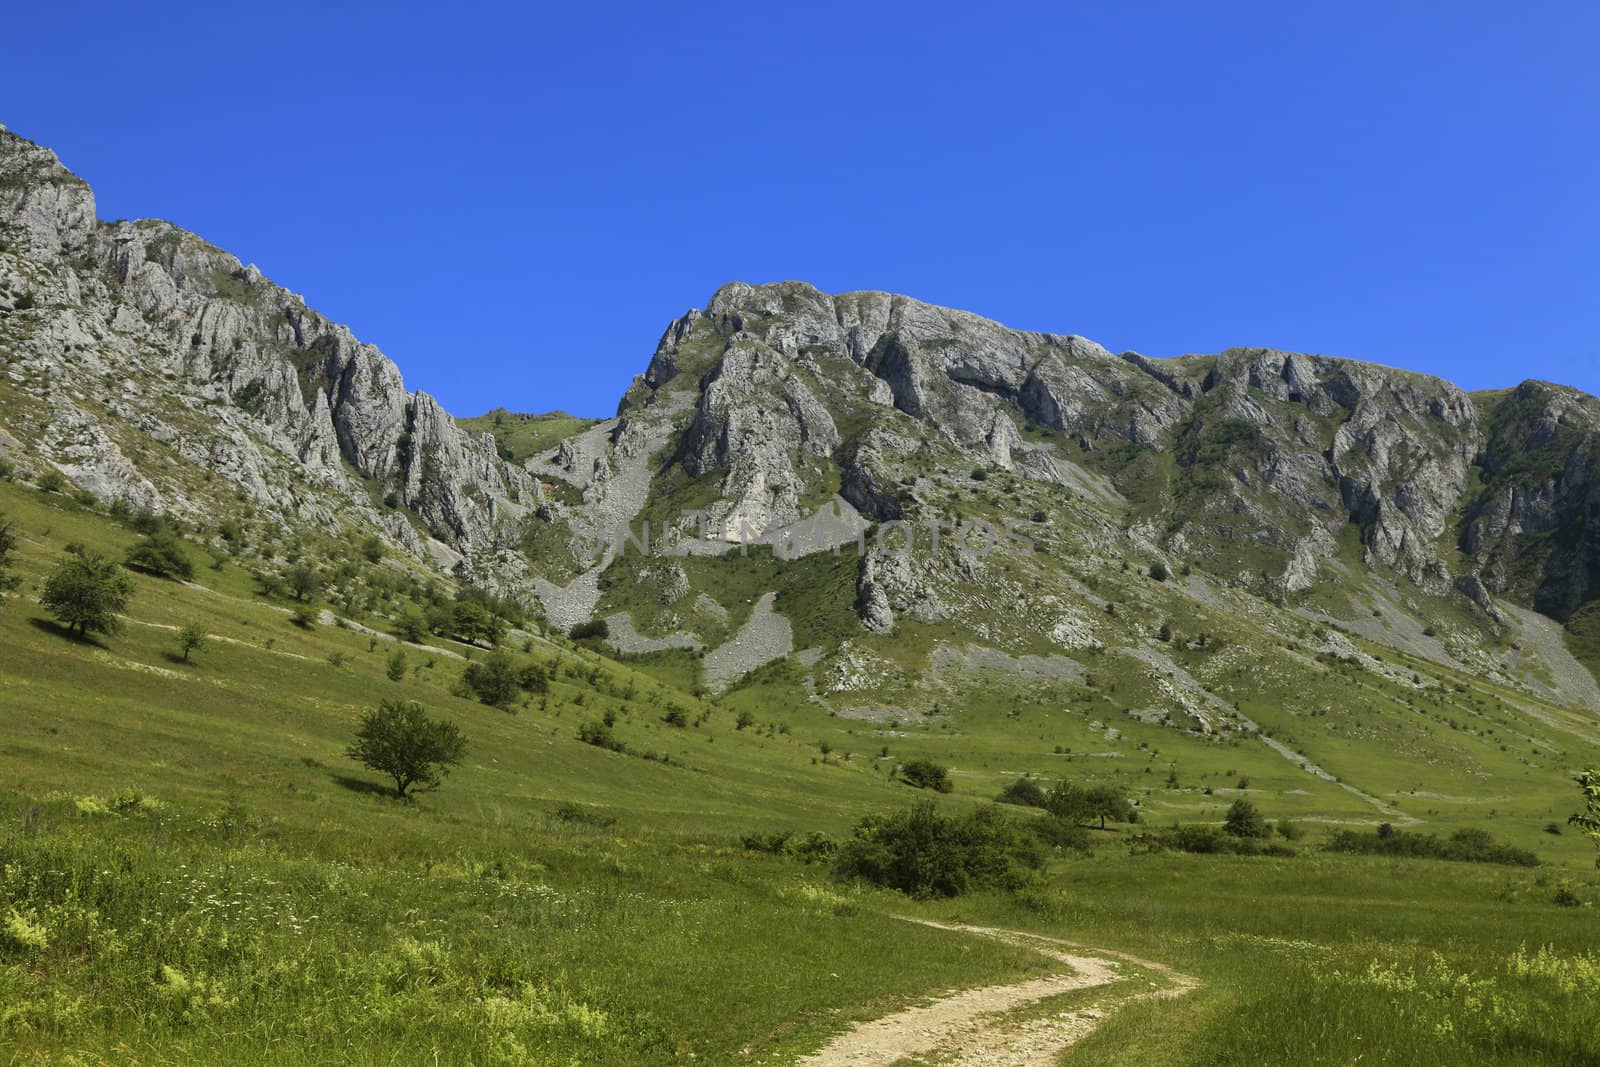 Summer image with rocks,green trees and blue sky in Trascau Mountains,Transylvania,Romania.
